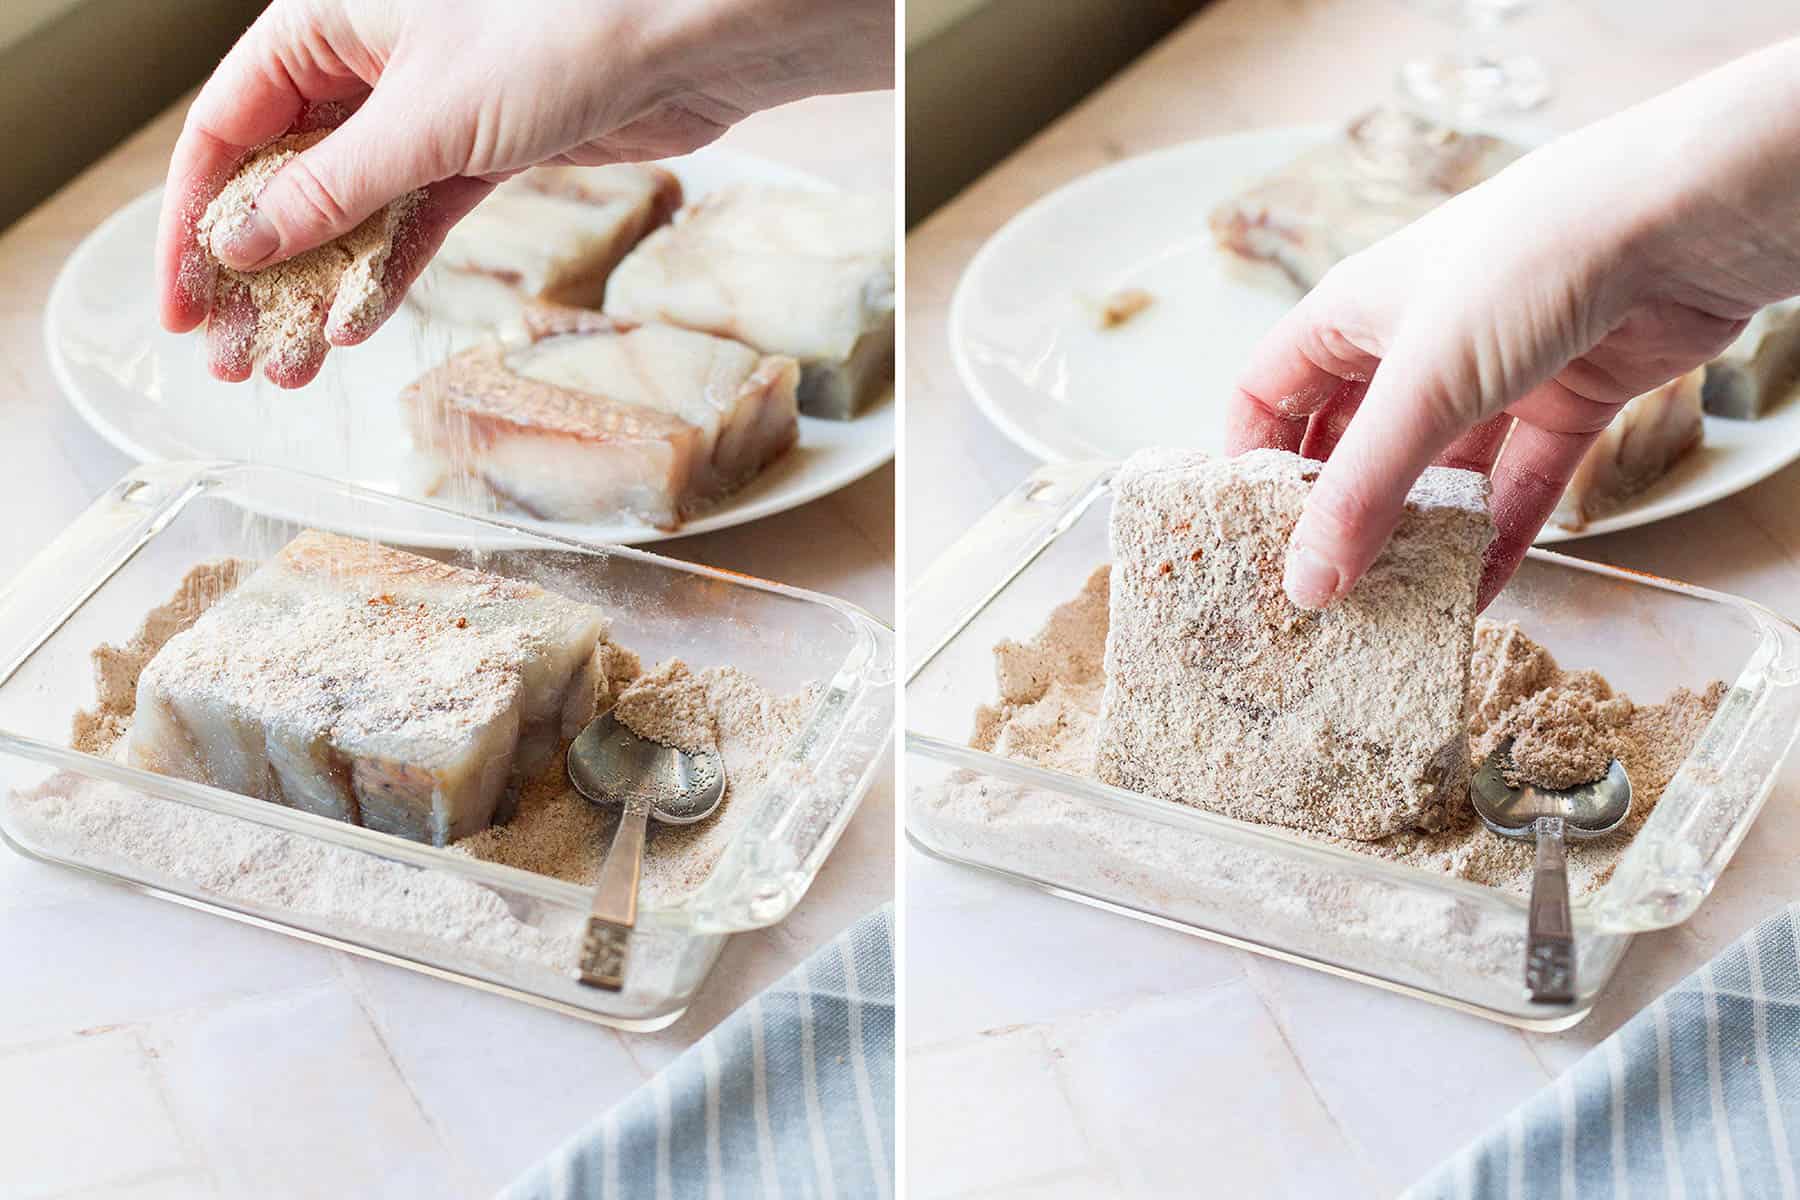 Steps on how to bread the fish.